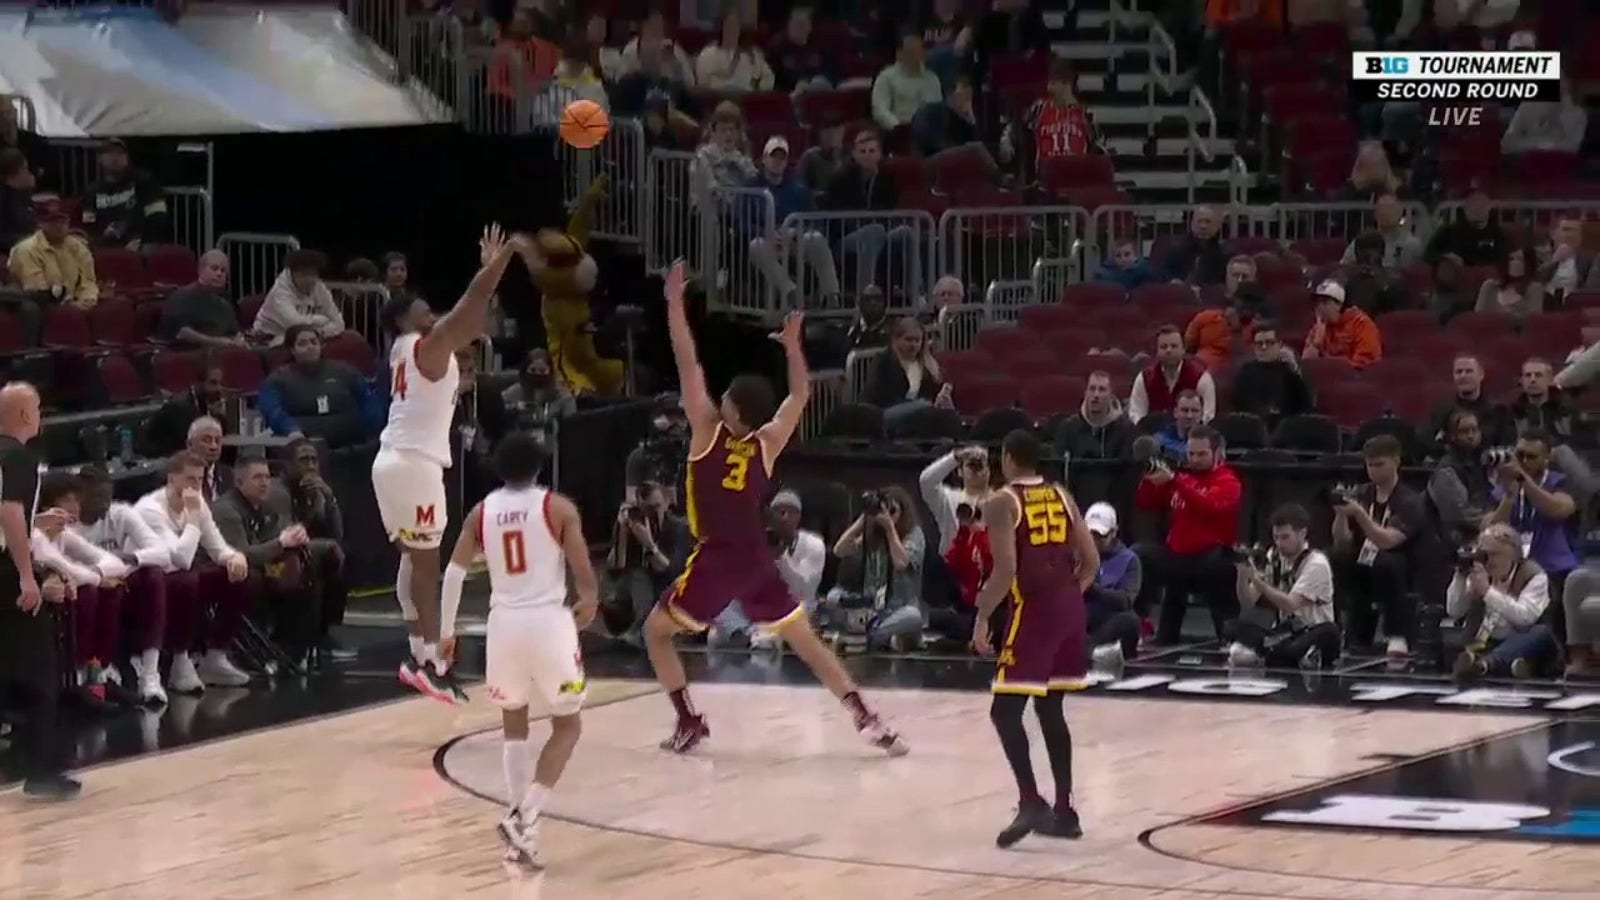 Donta Scott drains a 3-pointer to extend Maryland's lead